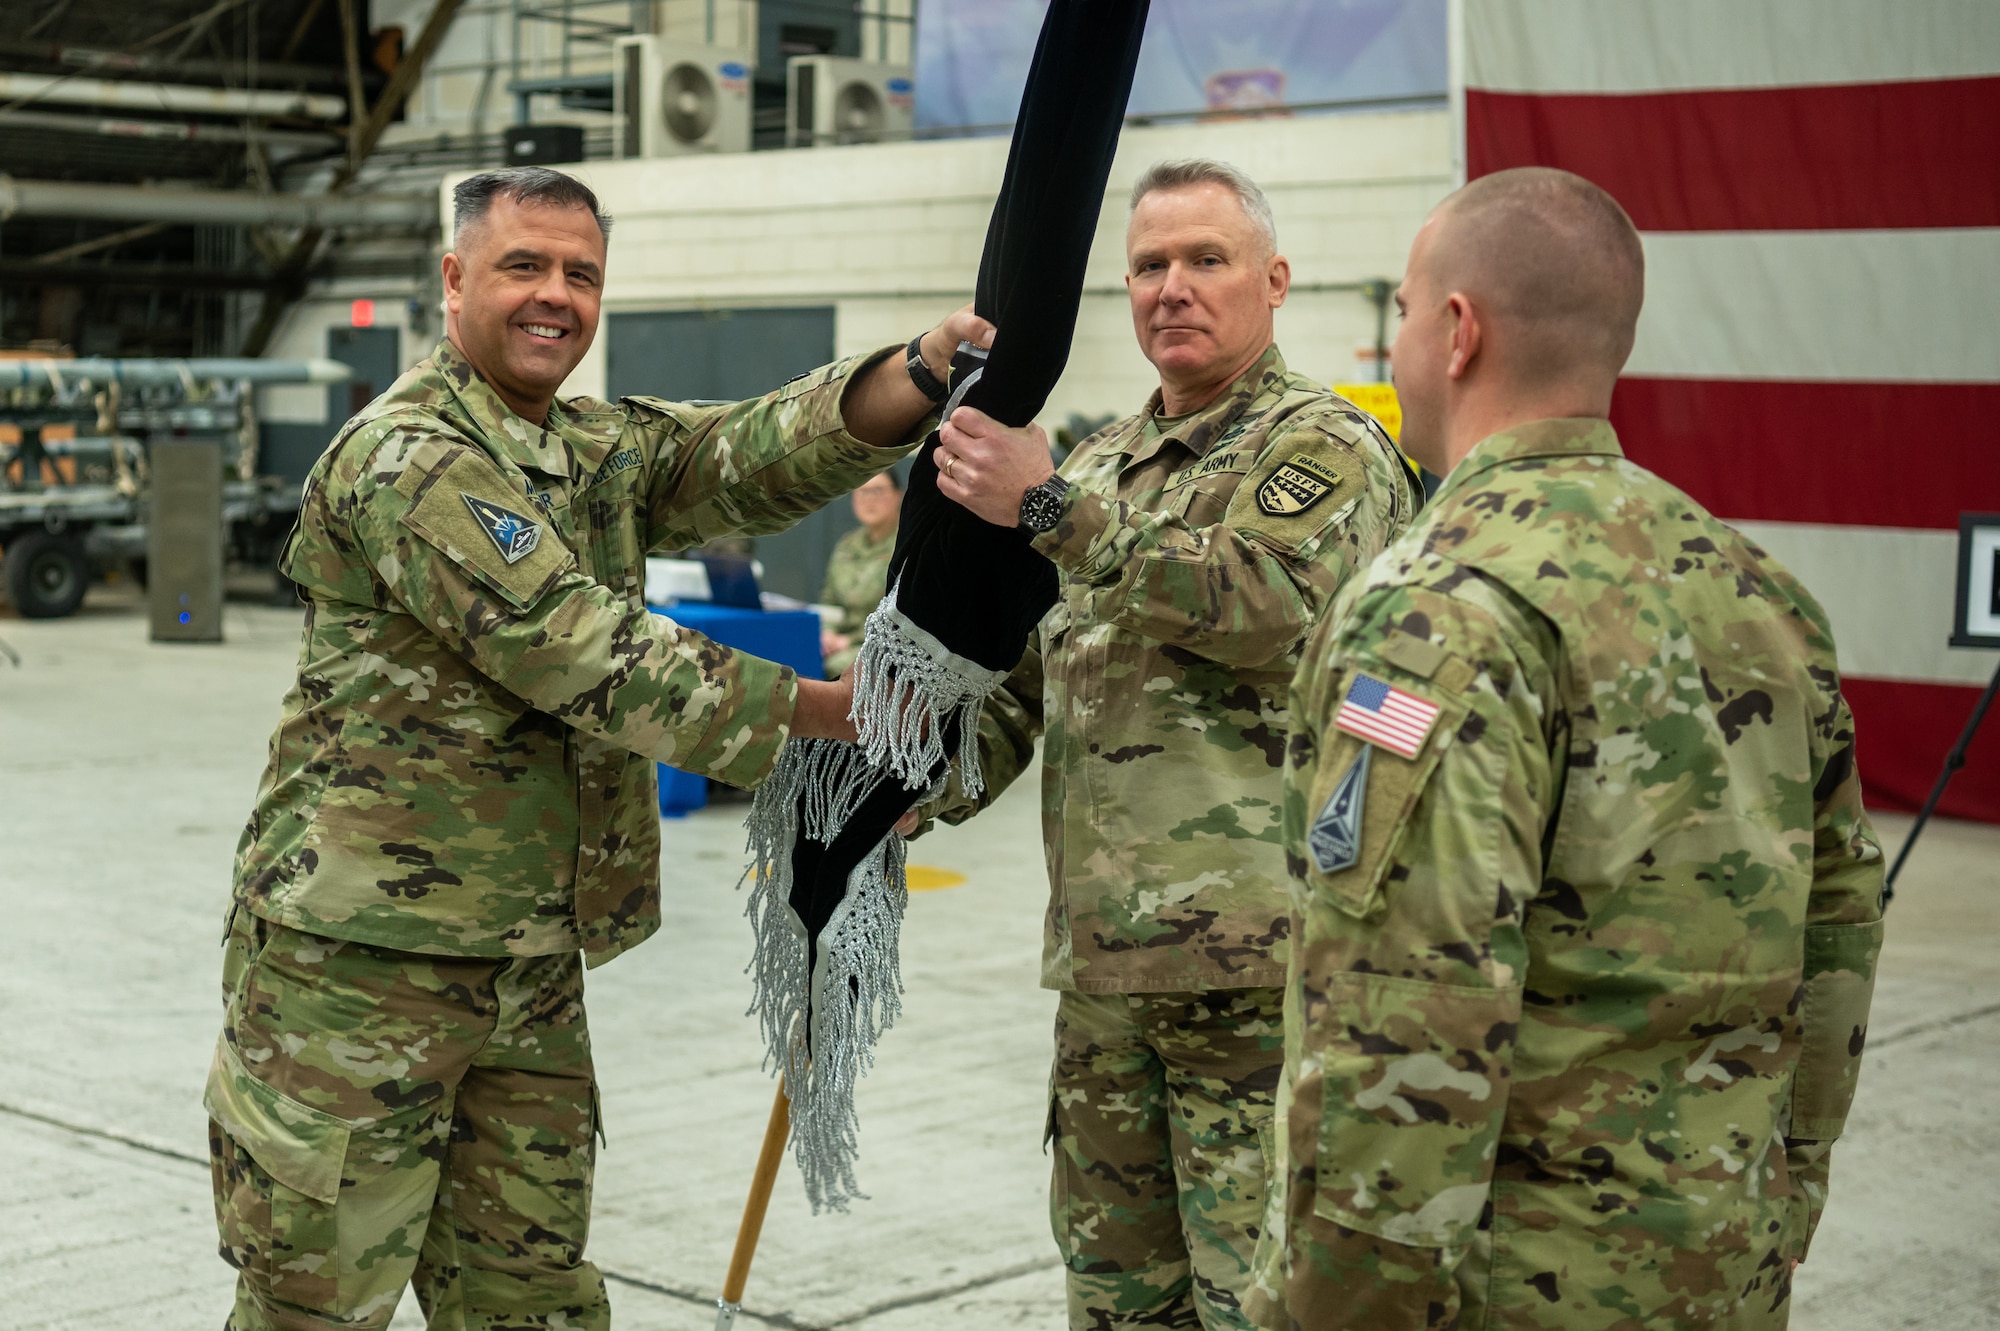 U.S. Space Force Brig. Gen. Anthony Mastalir, U.S. Space Forces Indo-Pacific Command commander, passes the newly activated U.S. Space Forces Korea’s guidon to U.S. Army Gen. Paul LaCamera, U.S. Forces Korea commander, during the unit’s activation ceremony at Osan Air Base, Republic of Korea, Dec. 14, 2022.